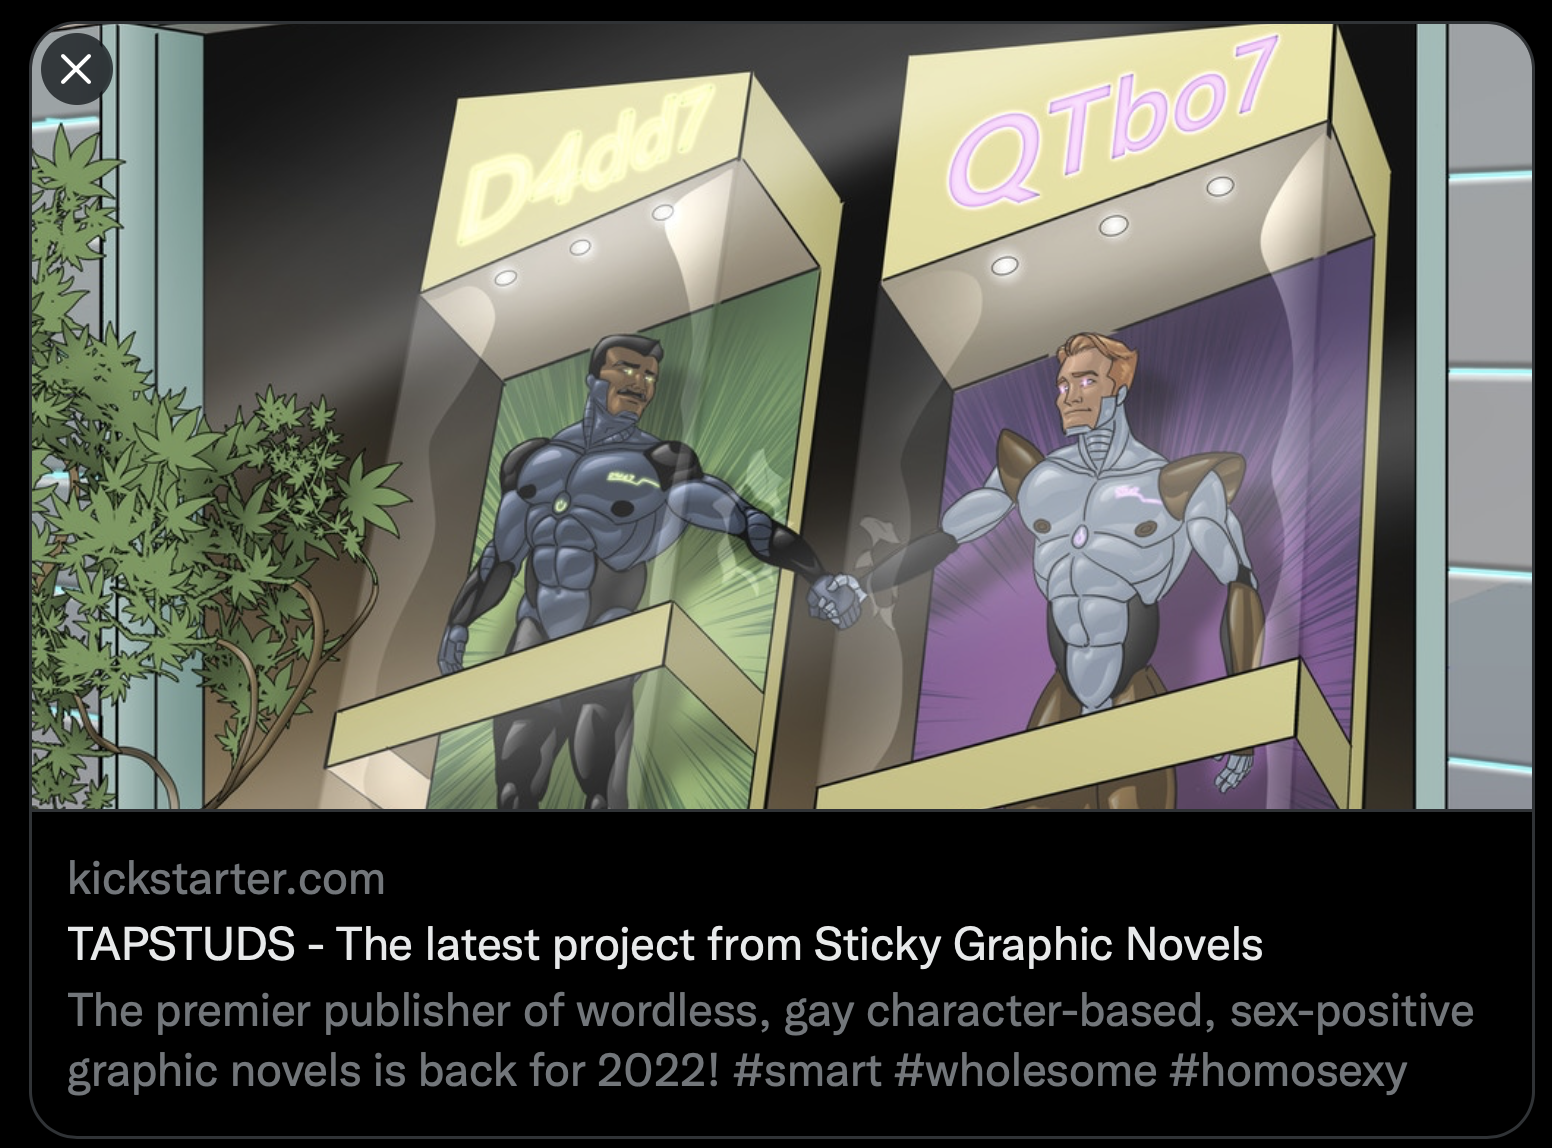 The premier publisher of wordless, gay character-based, sex-positive graphic novels is back for 2022! #smart #wholesome #homosexy